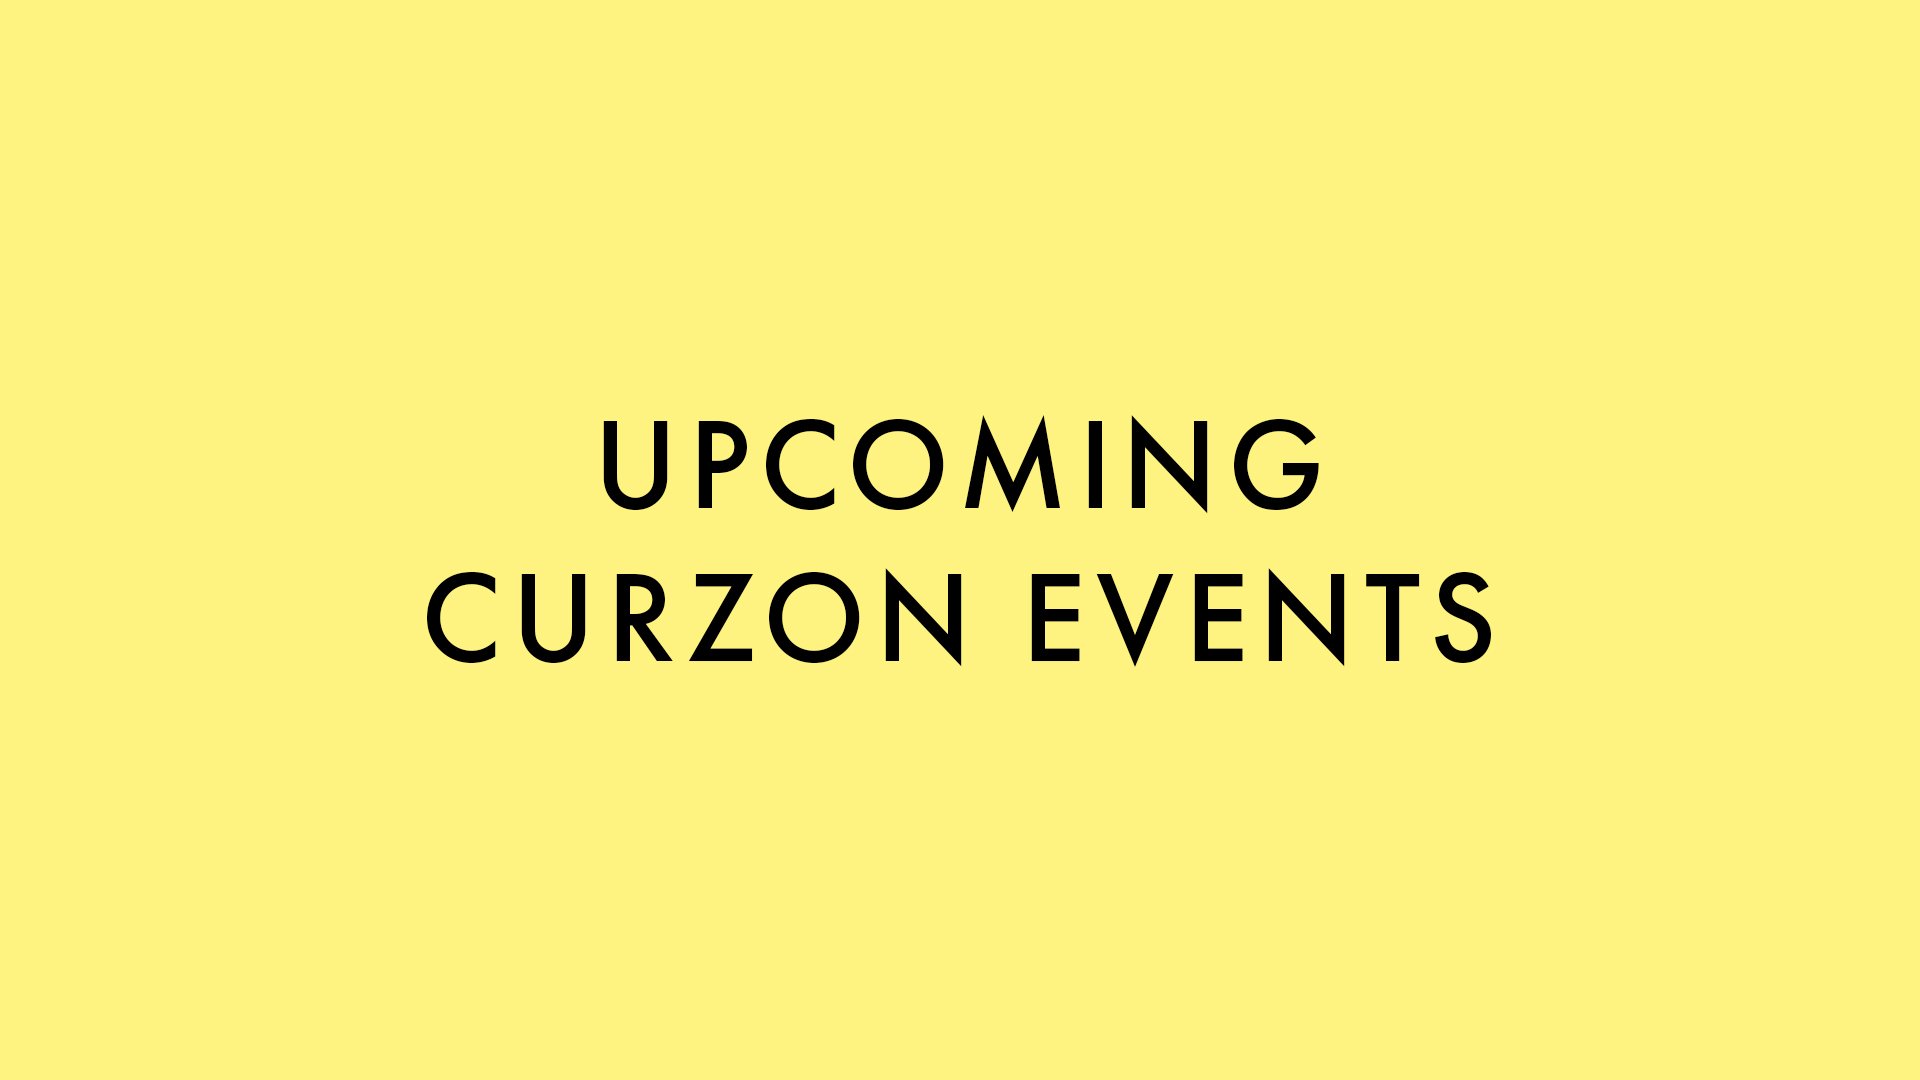 What's On At Curzon?